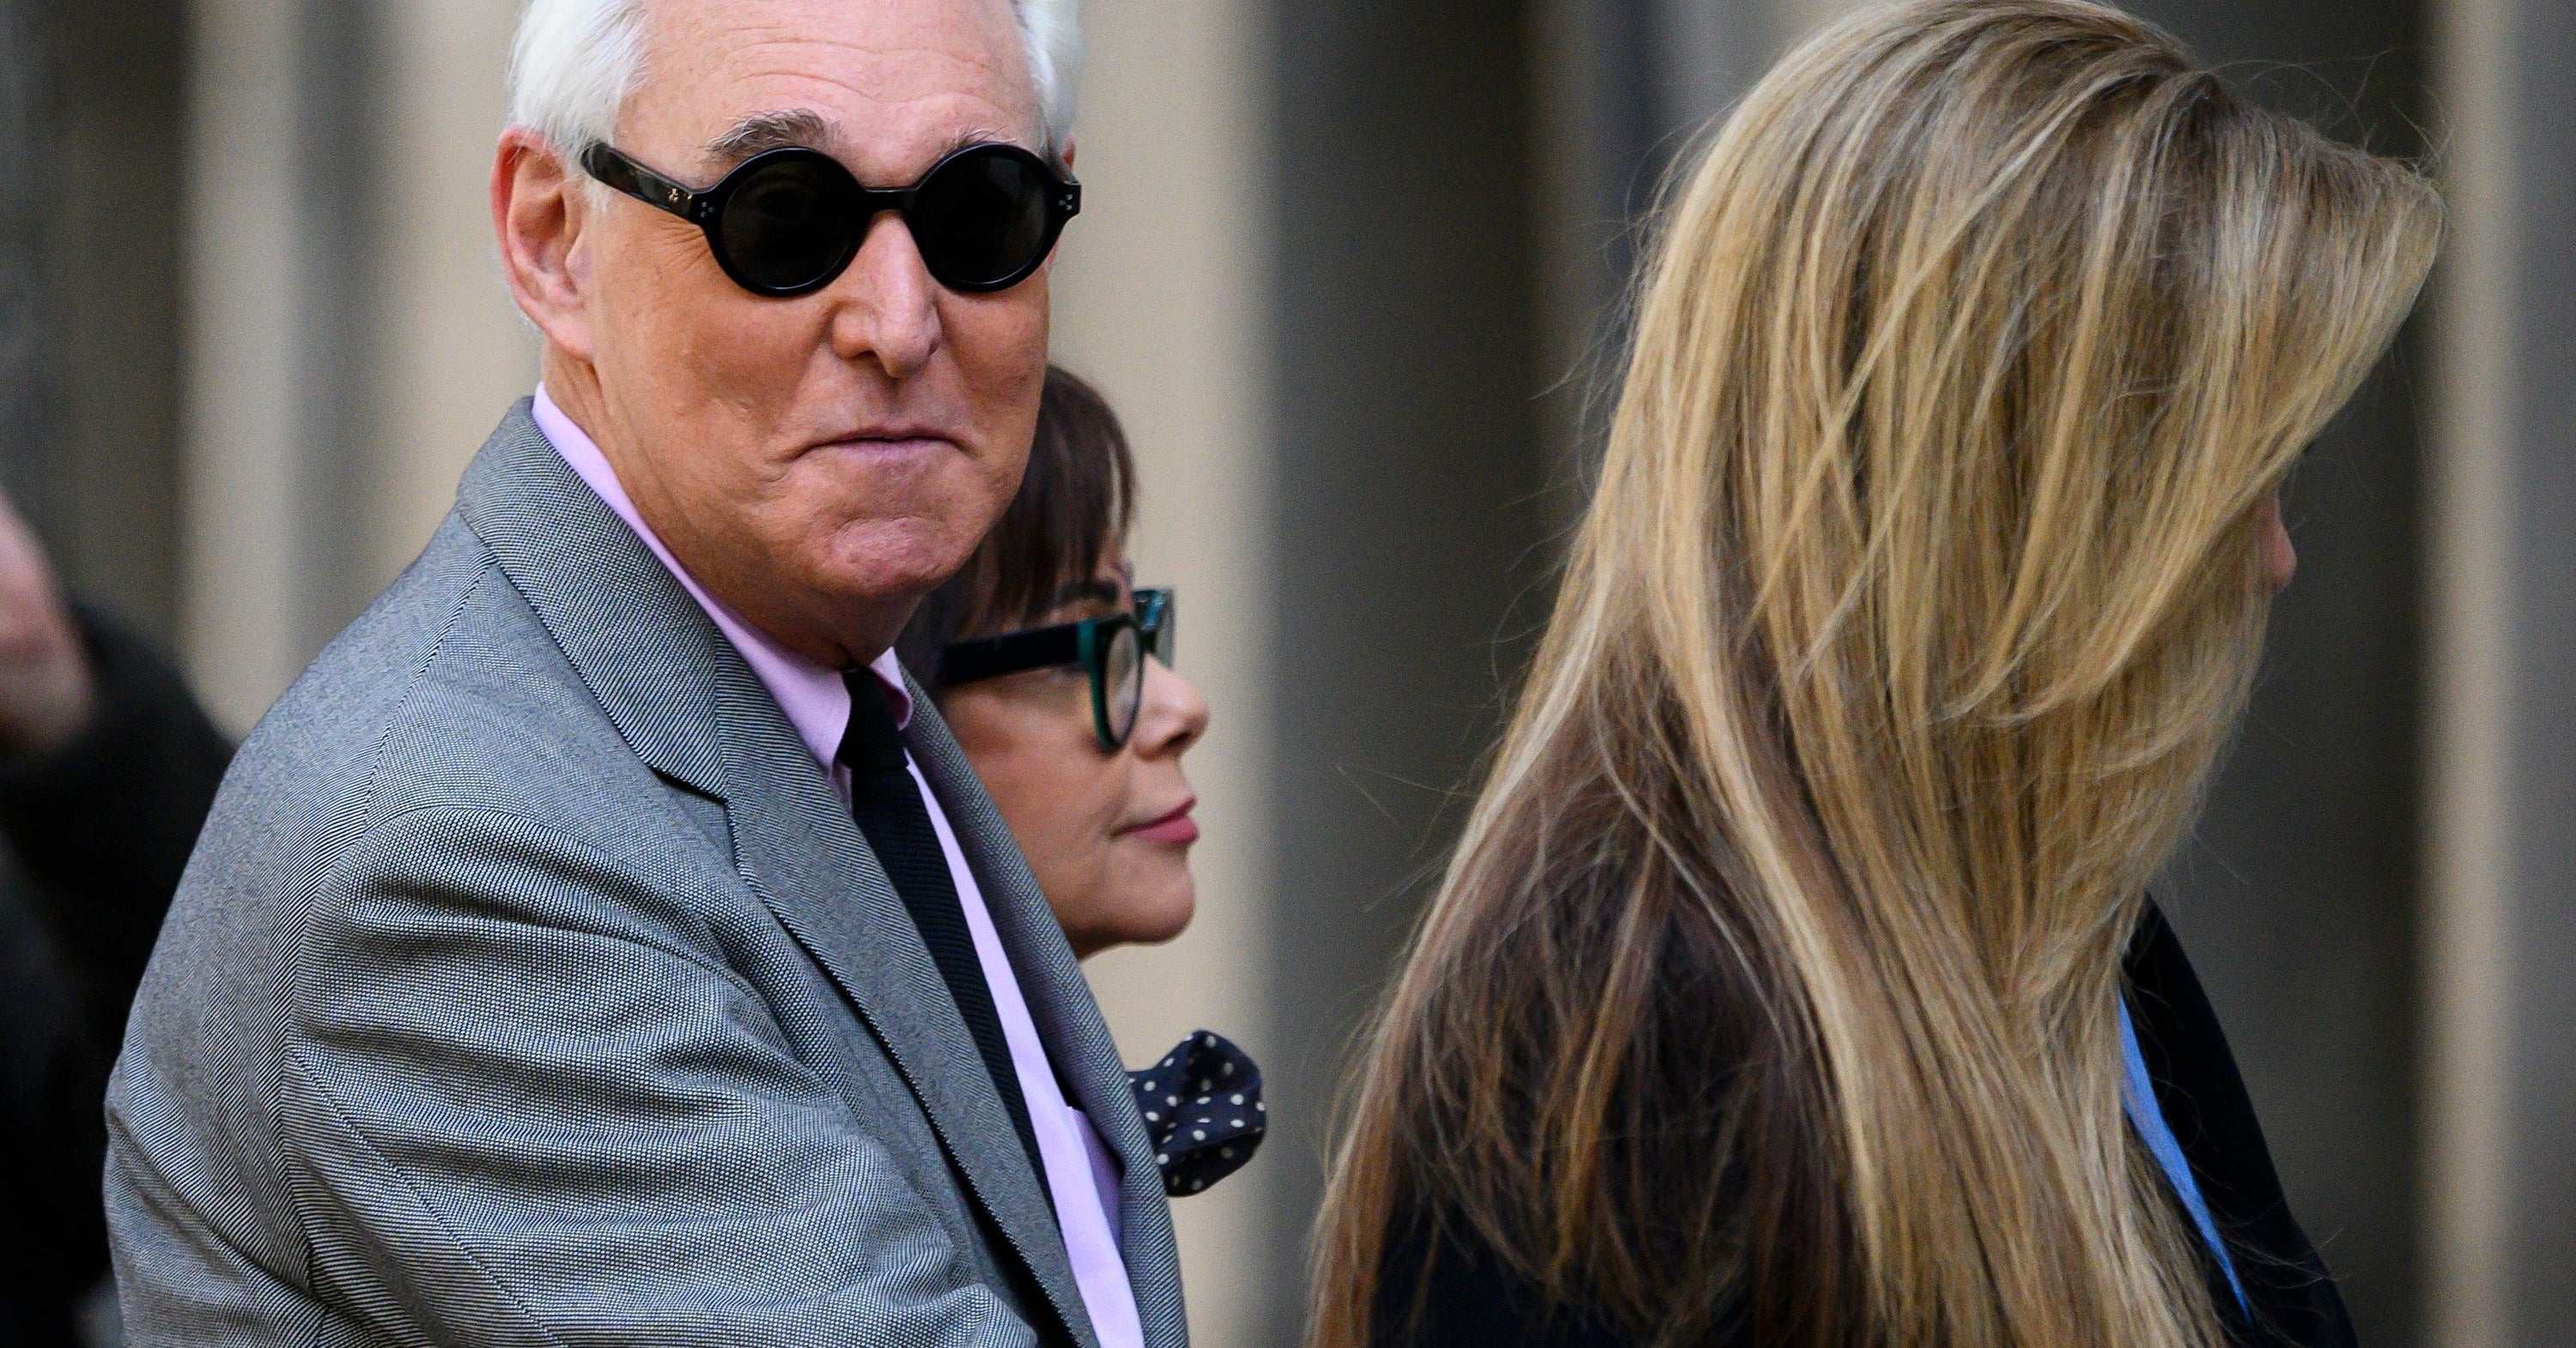 Roger Stone Longtime Trump Ally Found Guilty Of Lying To Congress And Witness Tampering